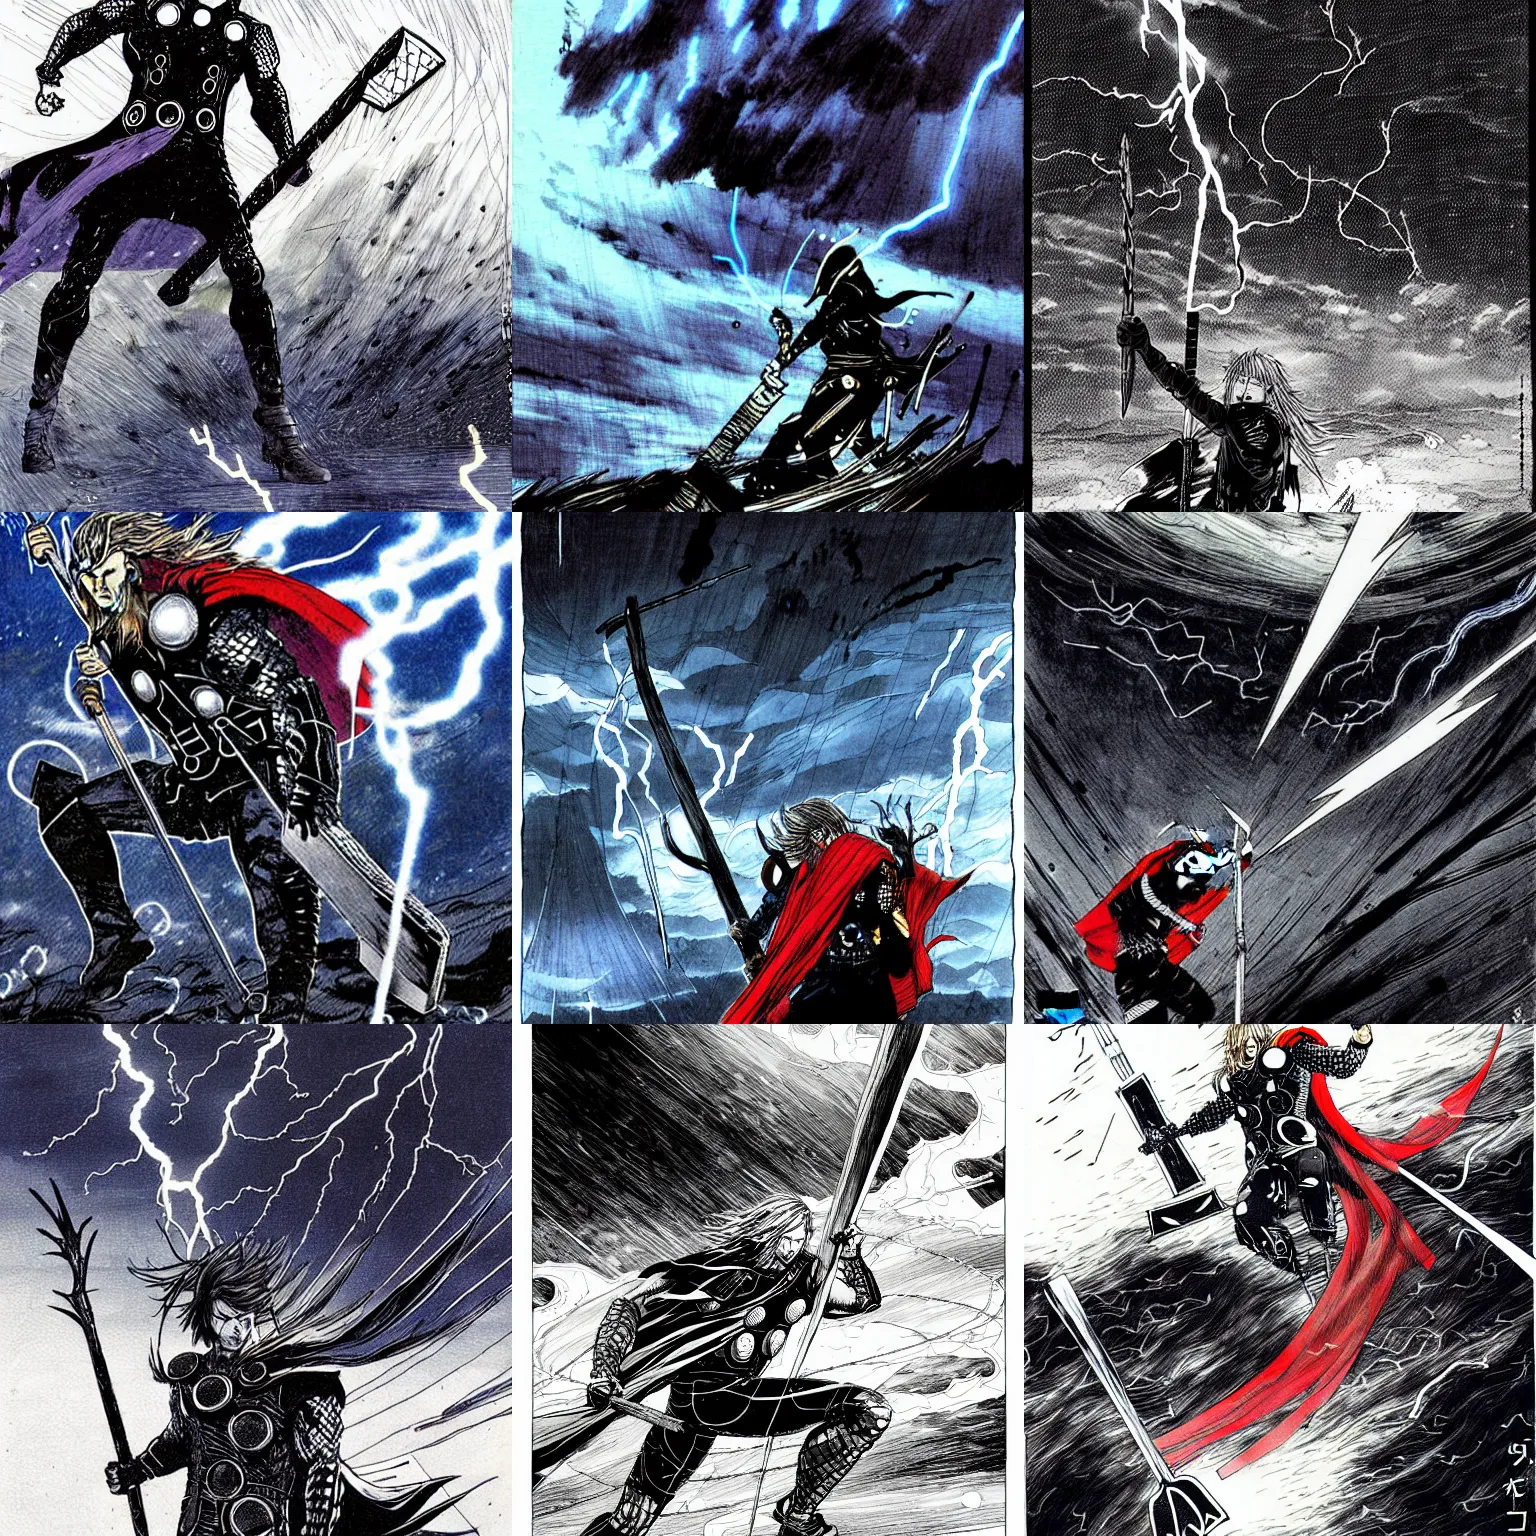 Prompt: thor catches lightning and holds an ax in an epic battle with storm clouds by tsutomu nihei